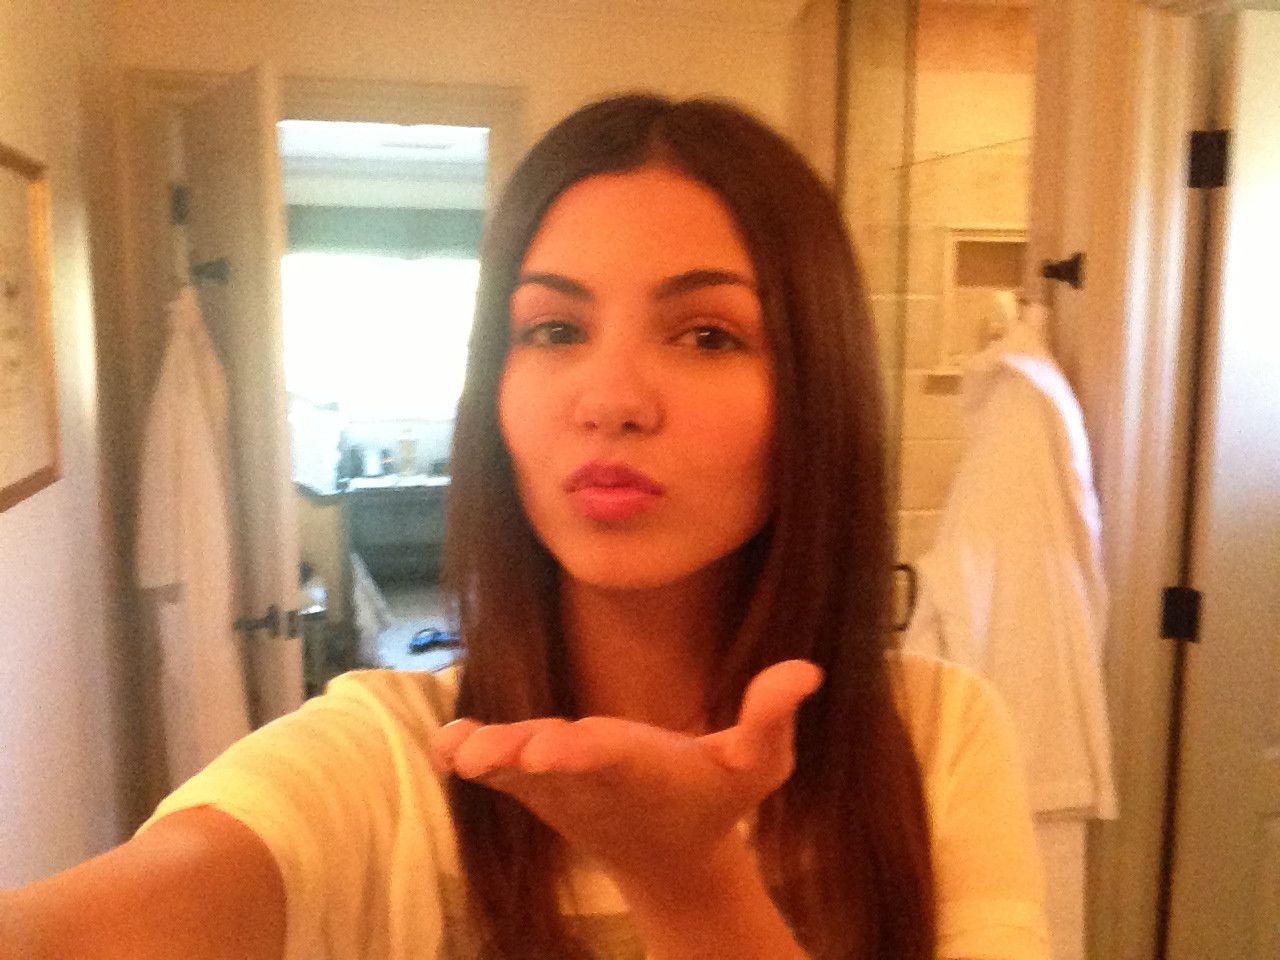 Victoria Justice Naked The Fappening 2014 2019 Celebrity Photo Leaks